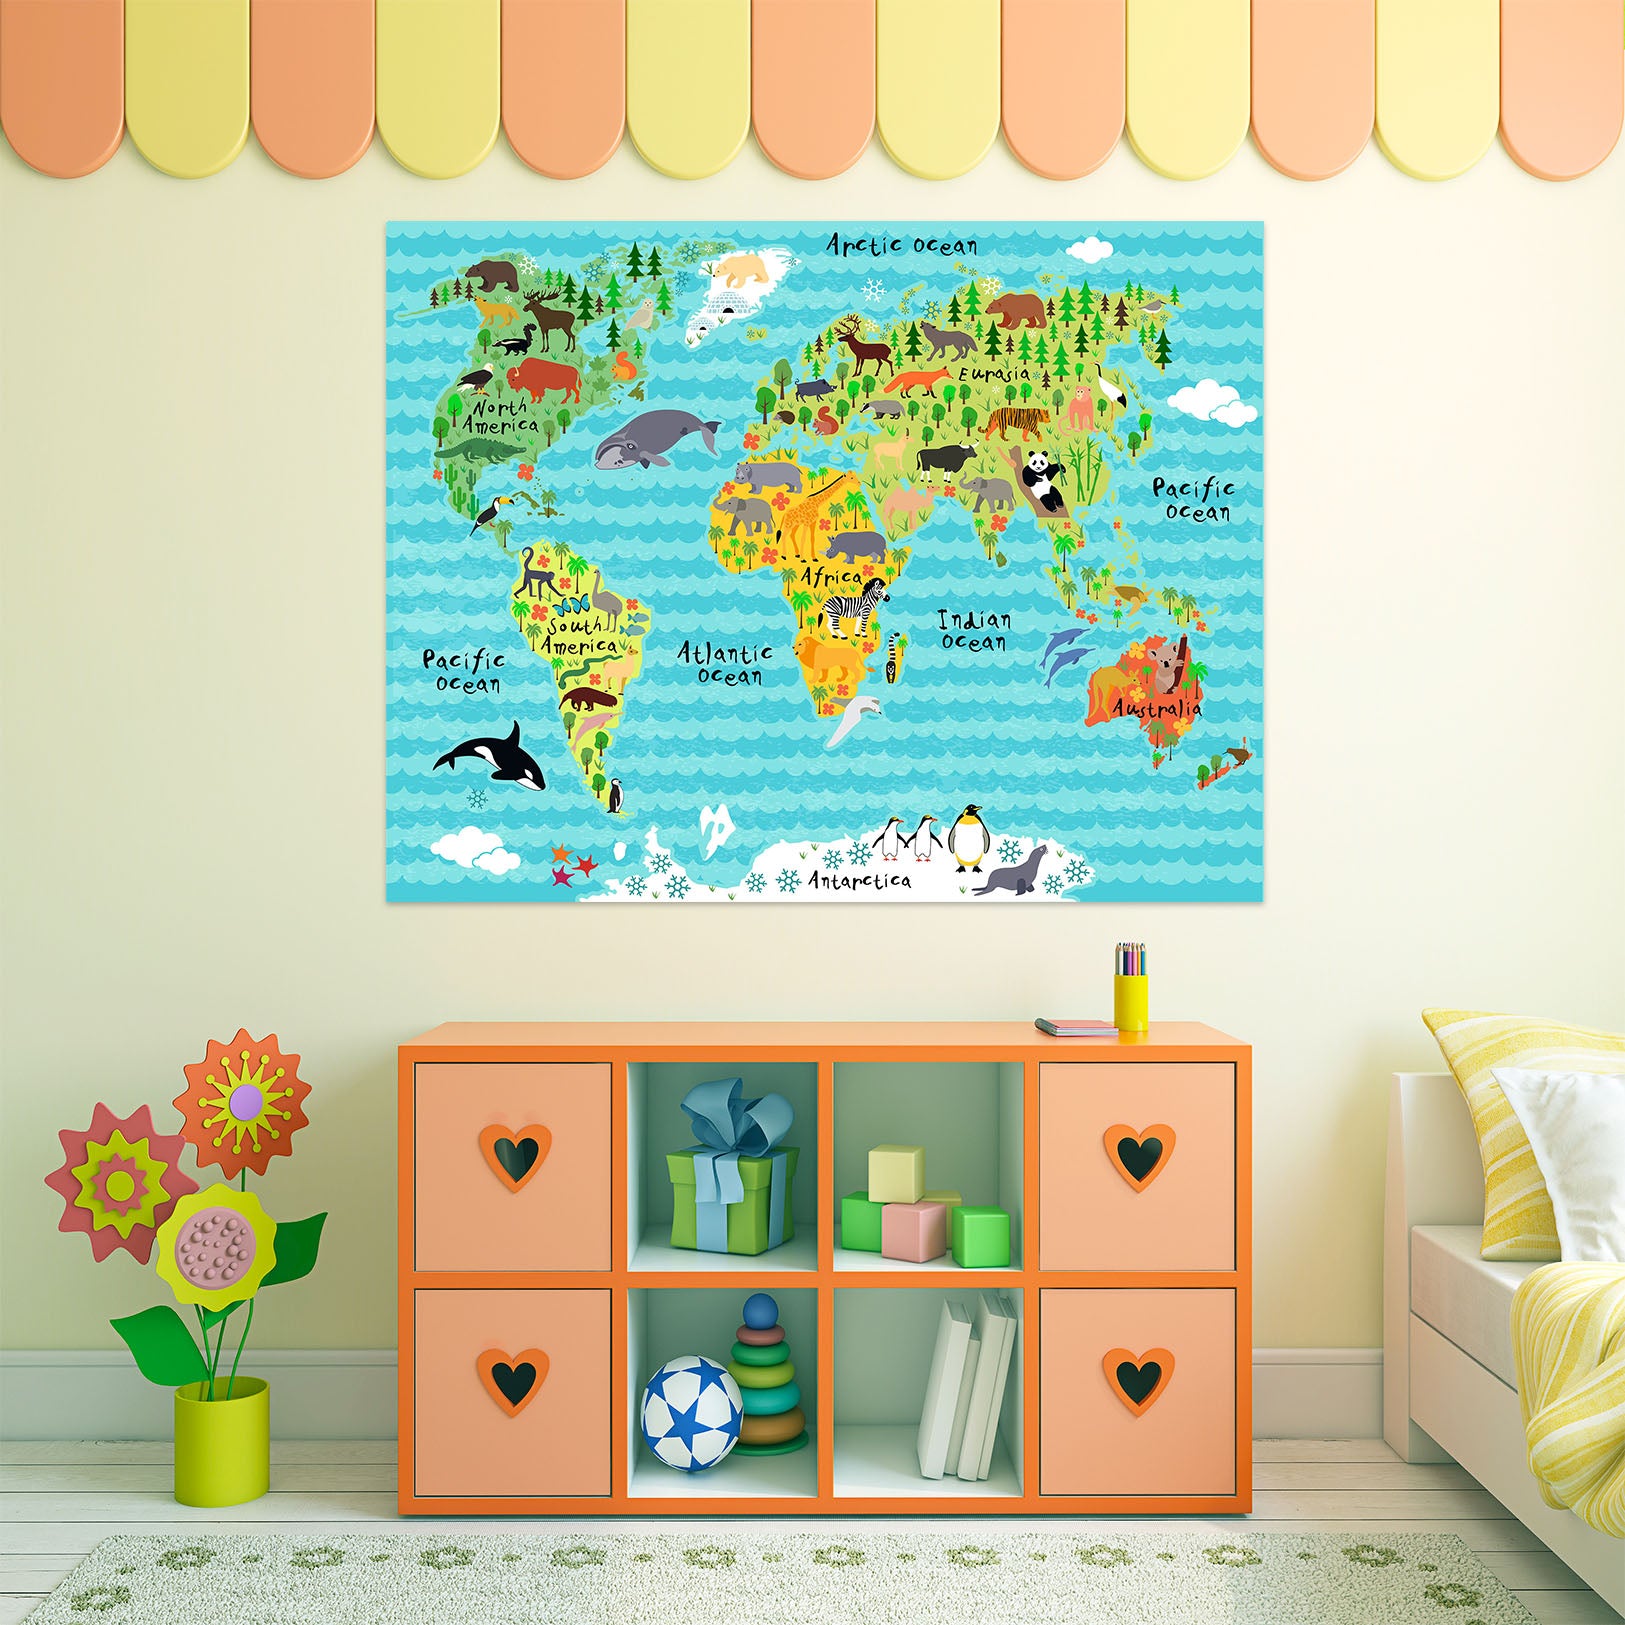 3D Colored Land 206 World Map Wall Sticker